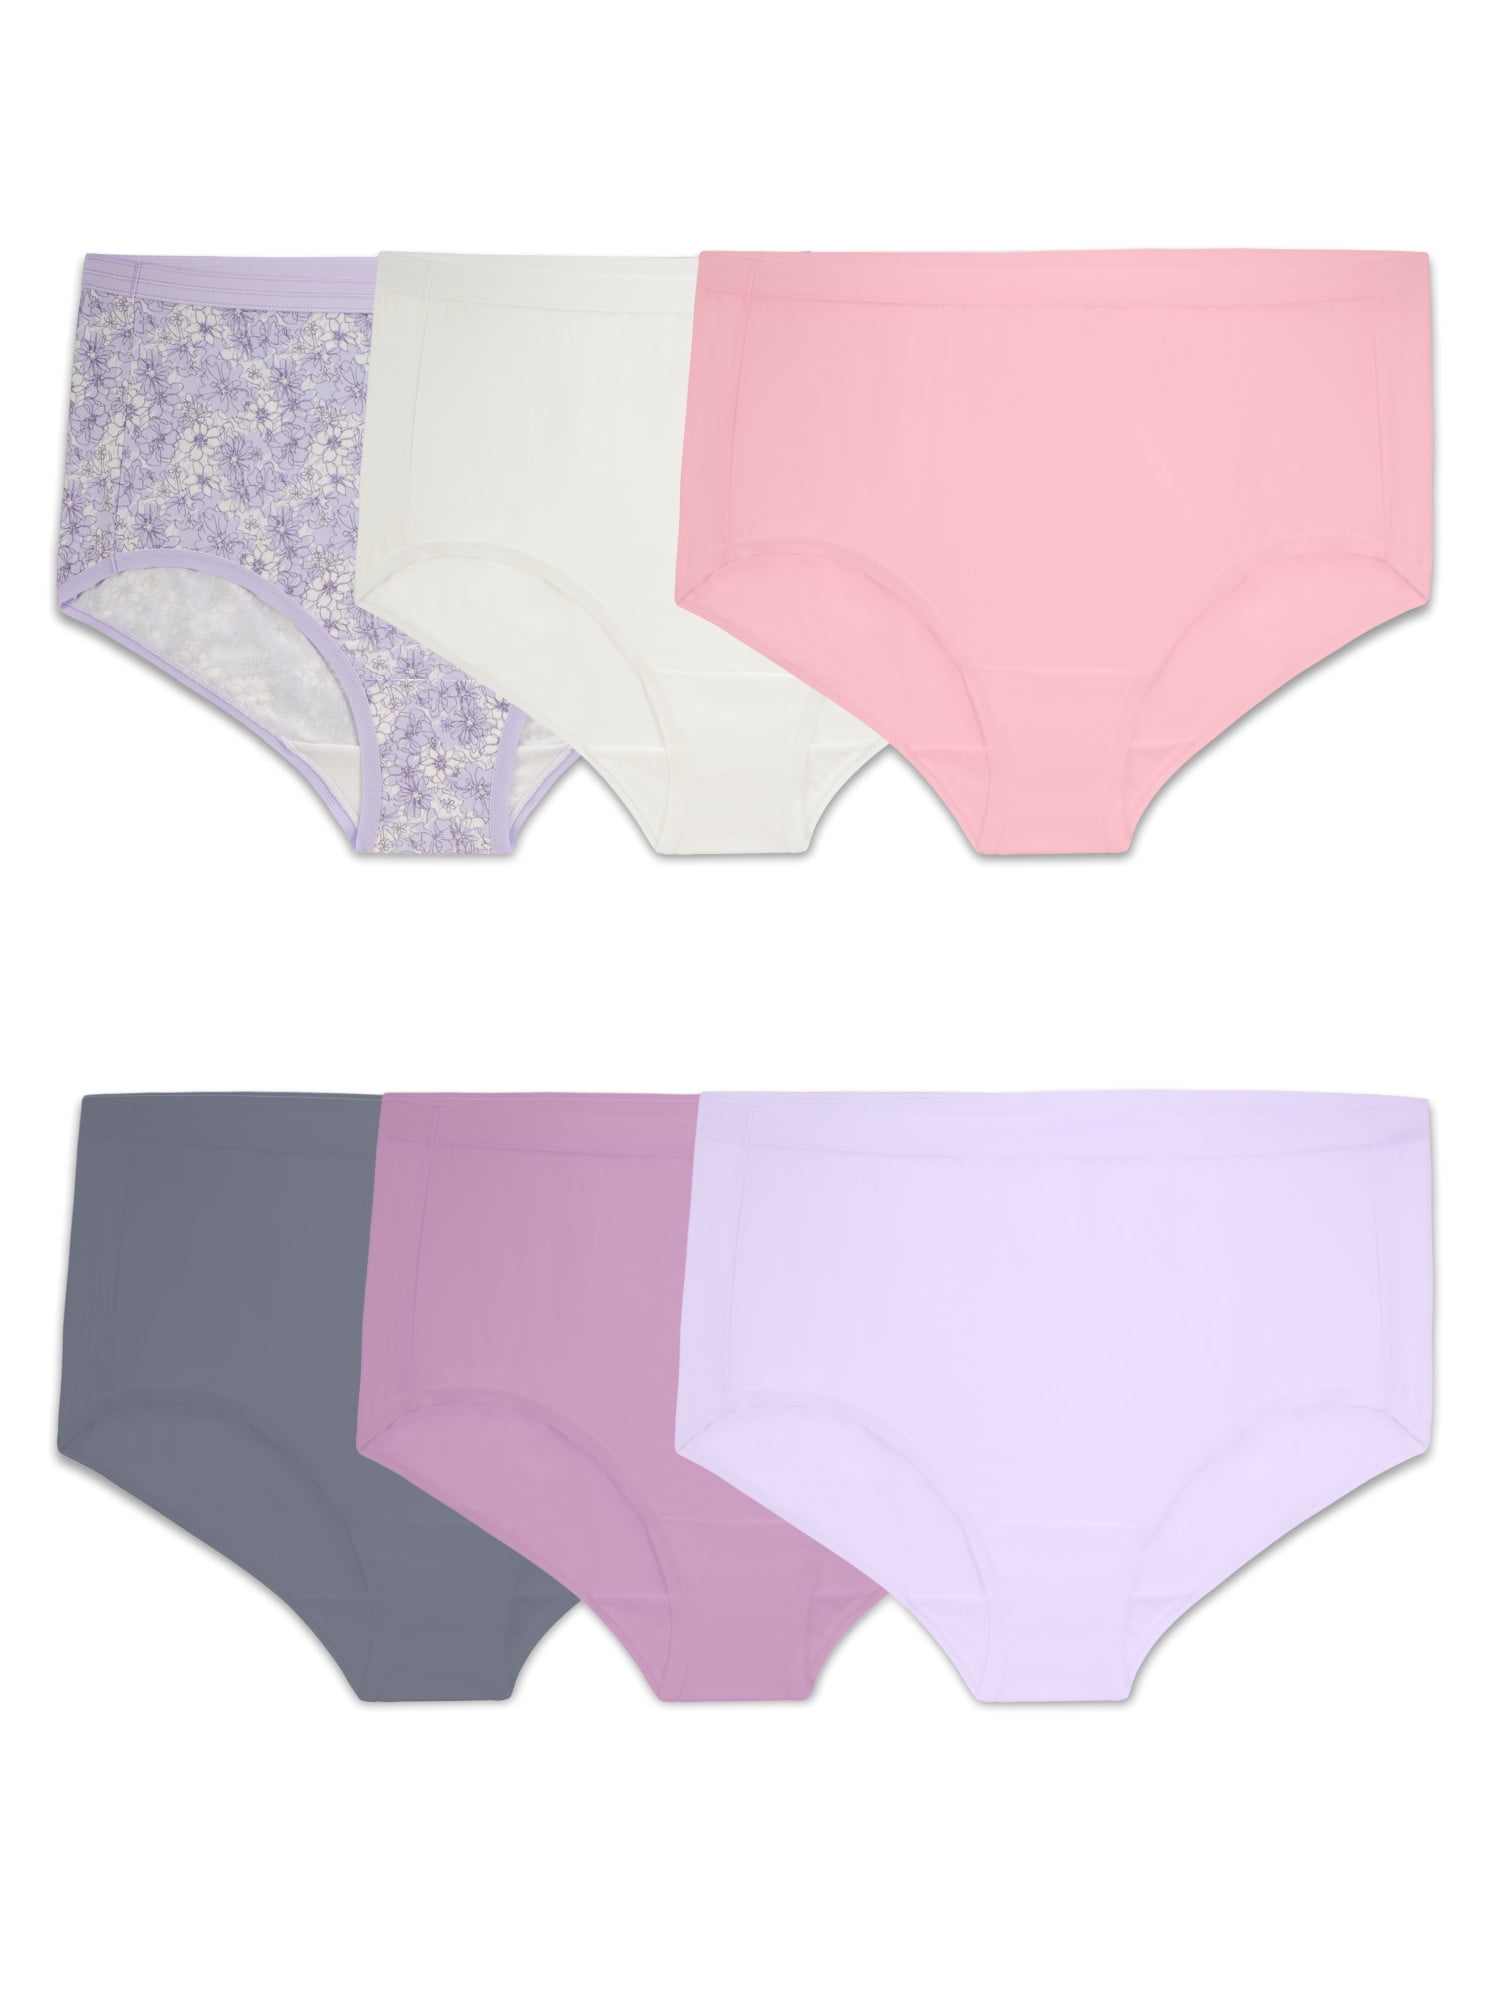 Fruit Of The Loom Women's Fit for Me Plus Size Cotton Brief Panties, 3 Pack  